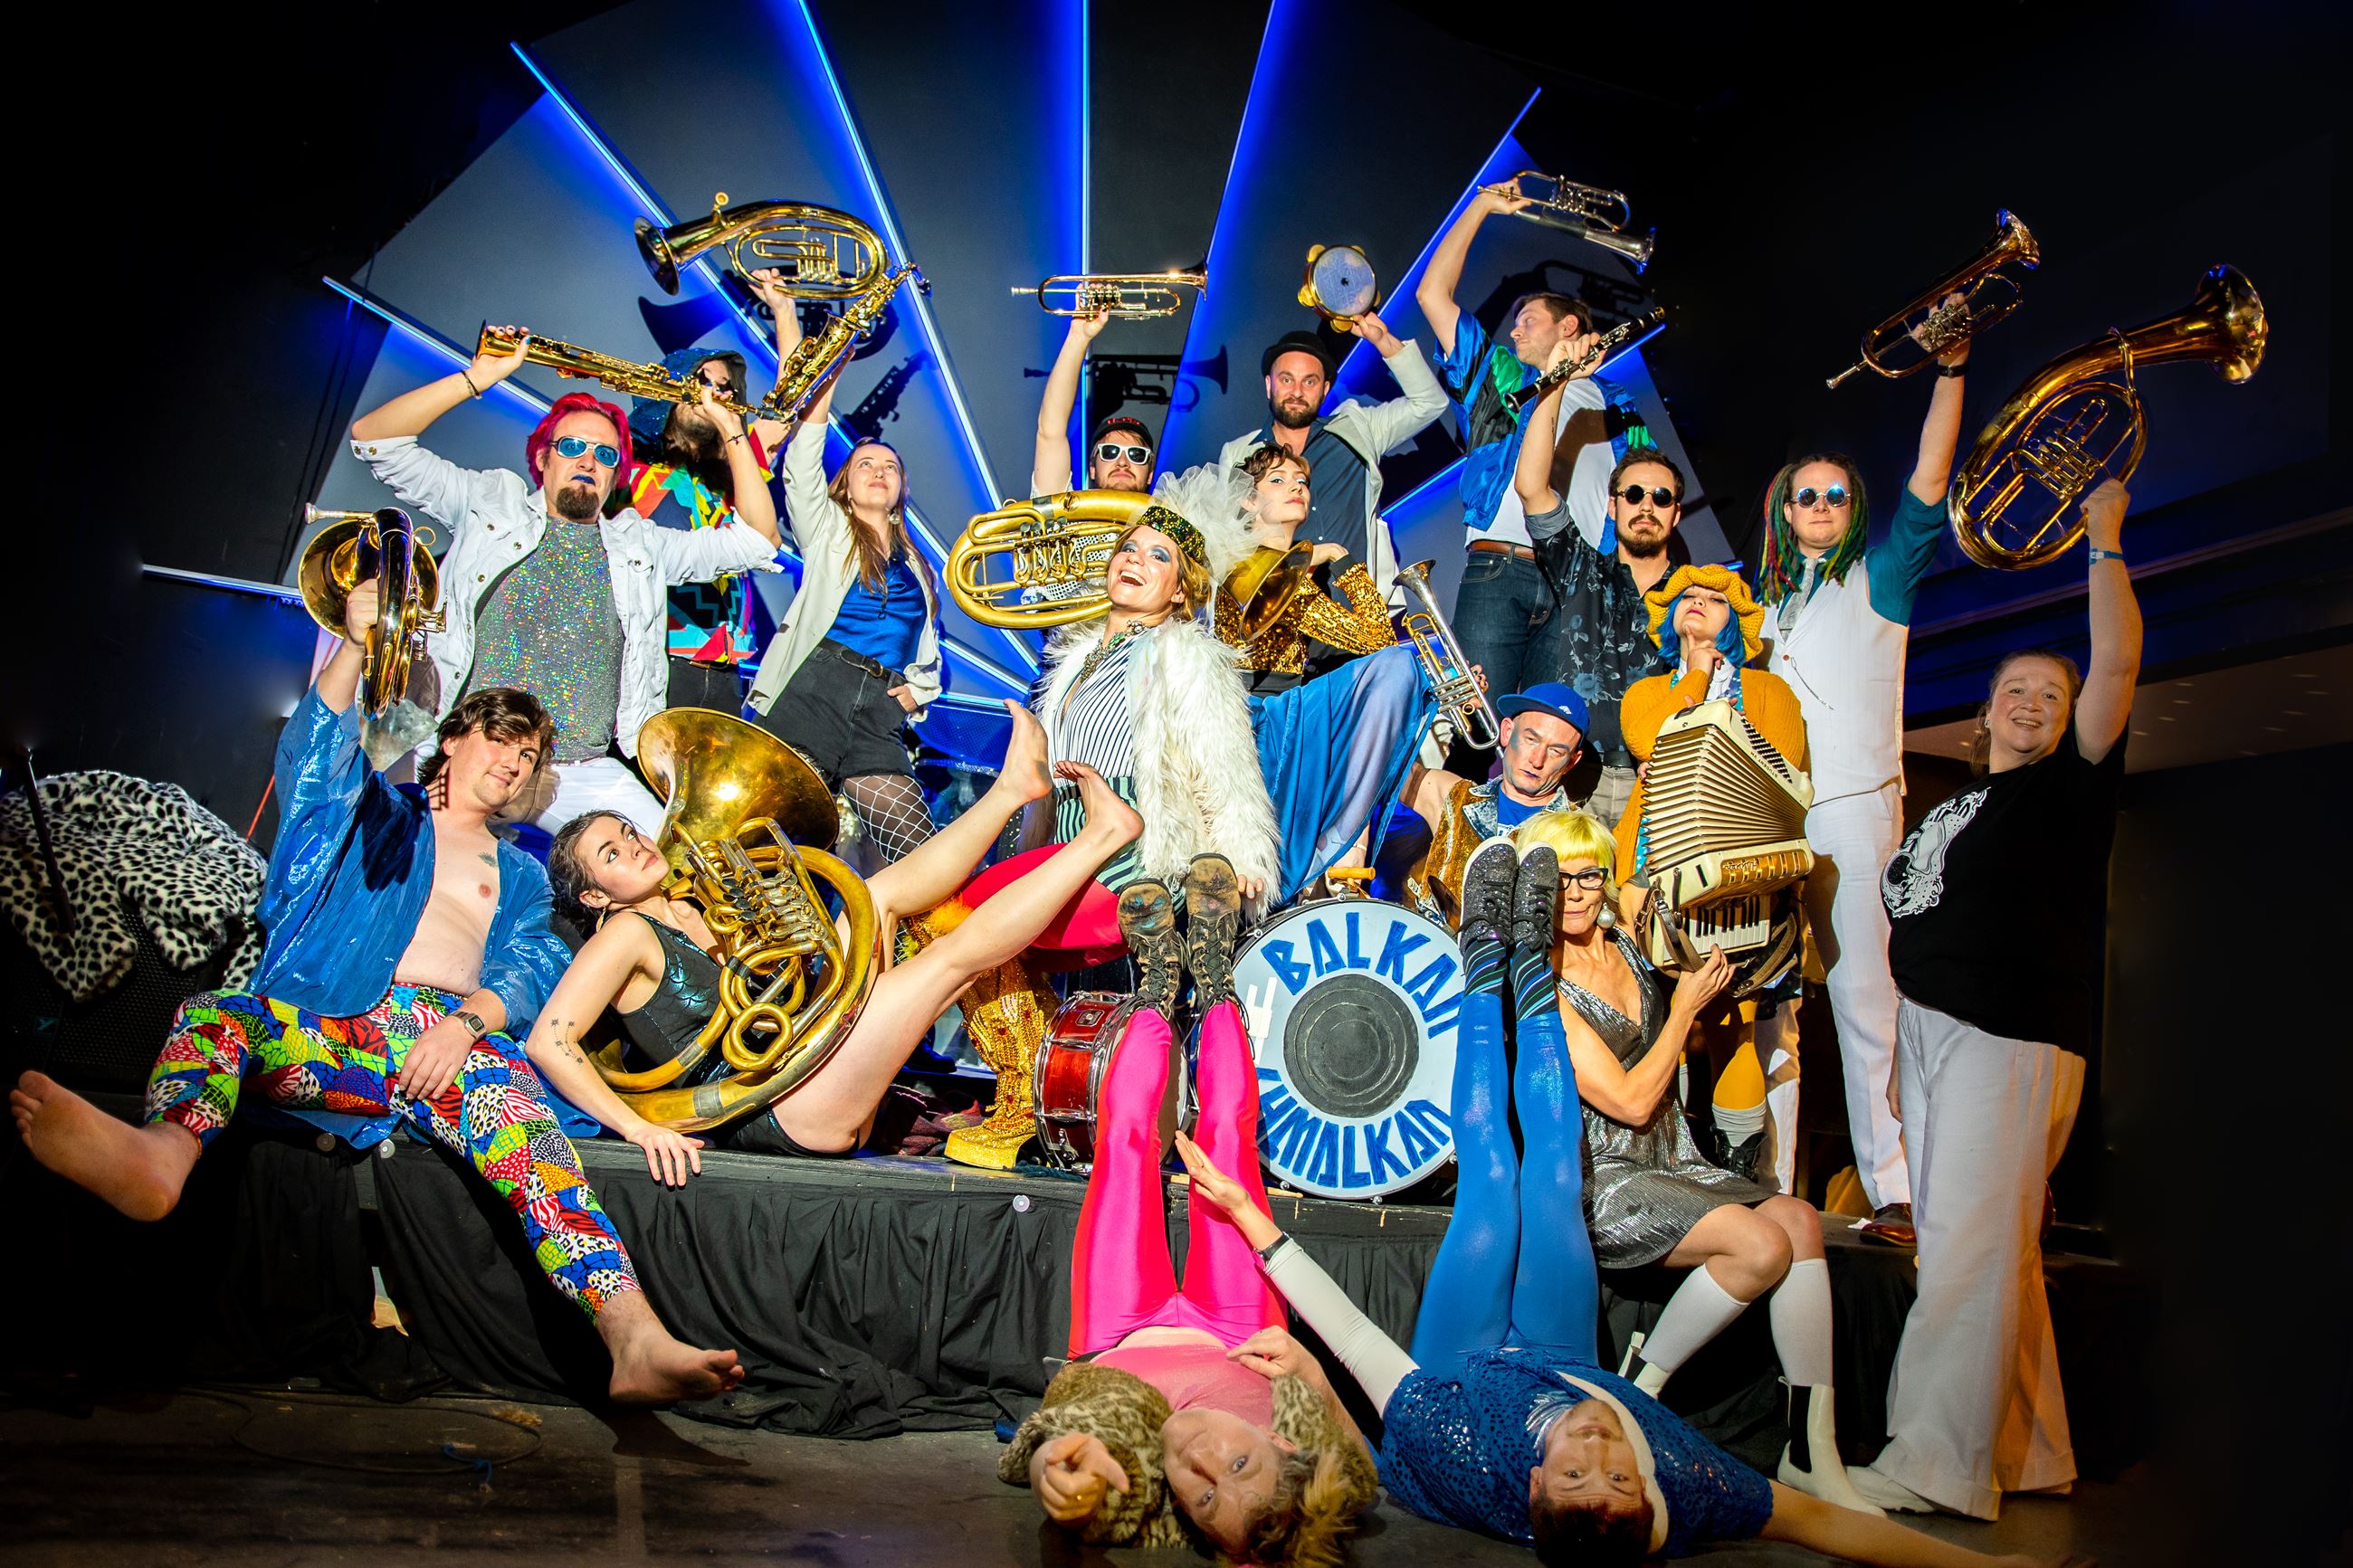 All 18 band members dressed in bright colours holding brass instruments in a fun energetic pose